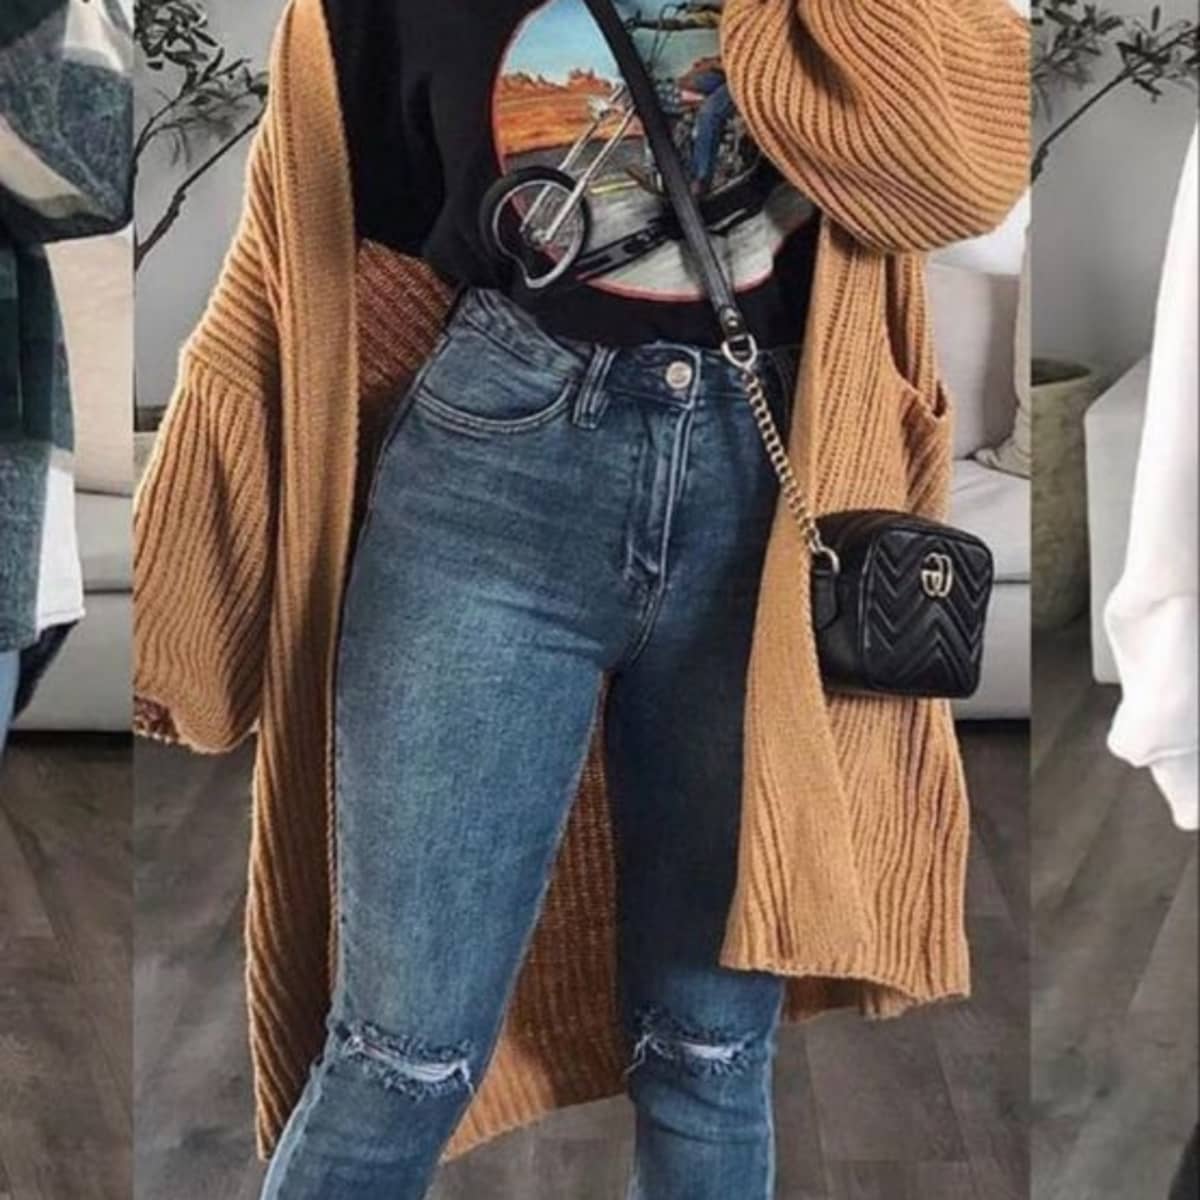 Fall looks  Fall trends outfits, Winter fashion outfits, Outfit inspo fall